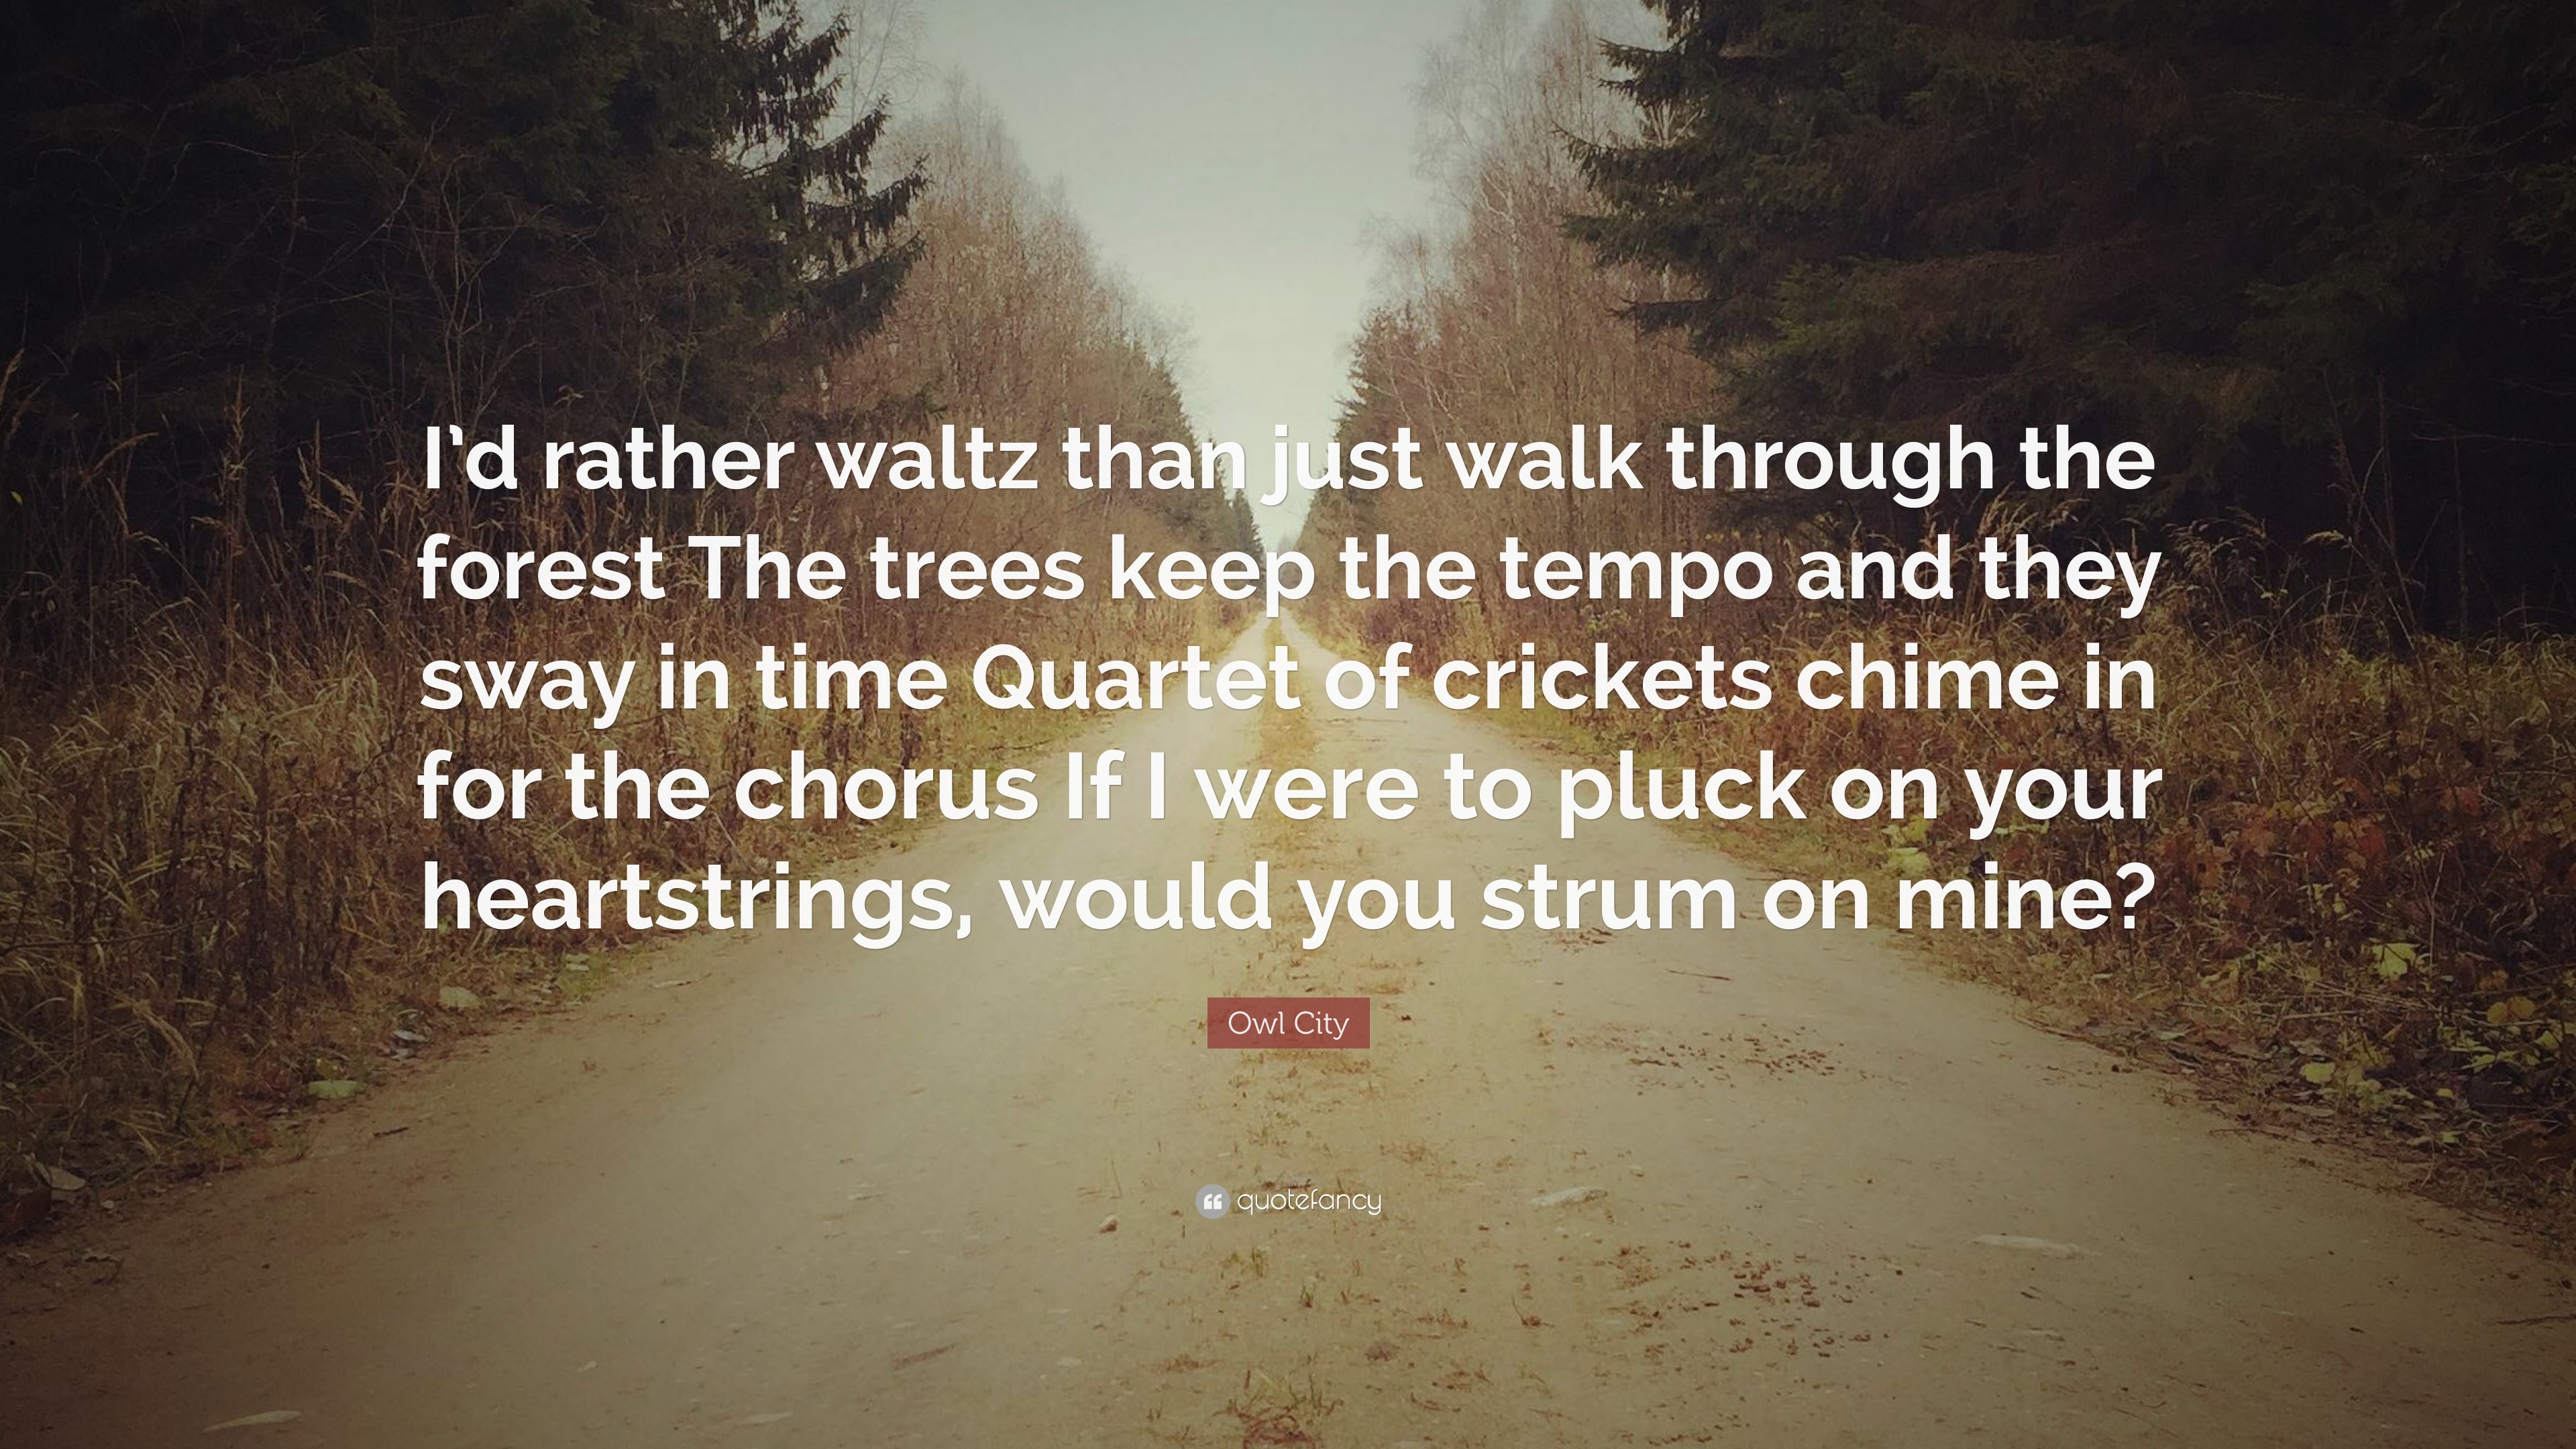 3840x2160 Owl City Quote: “I'd rather waltz than just walk through the forest